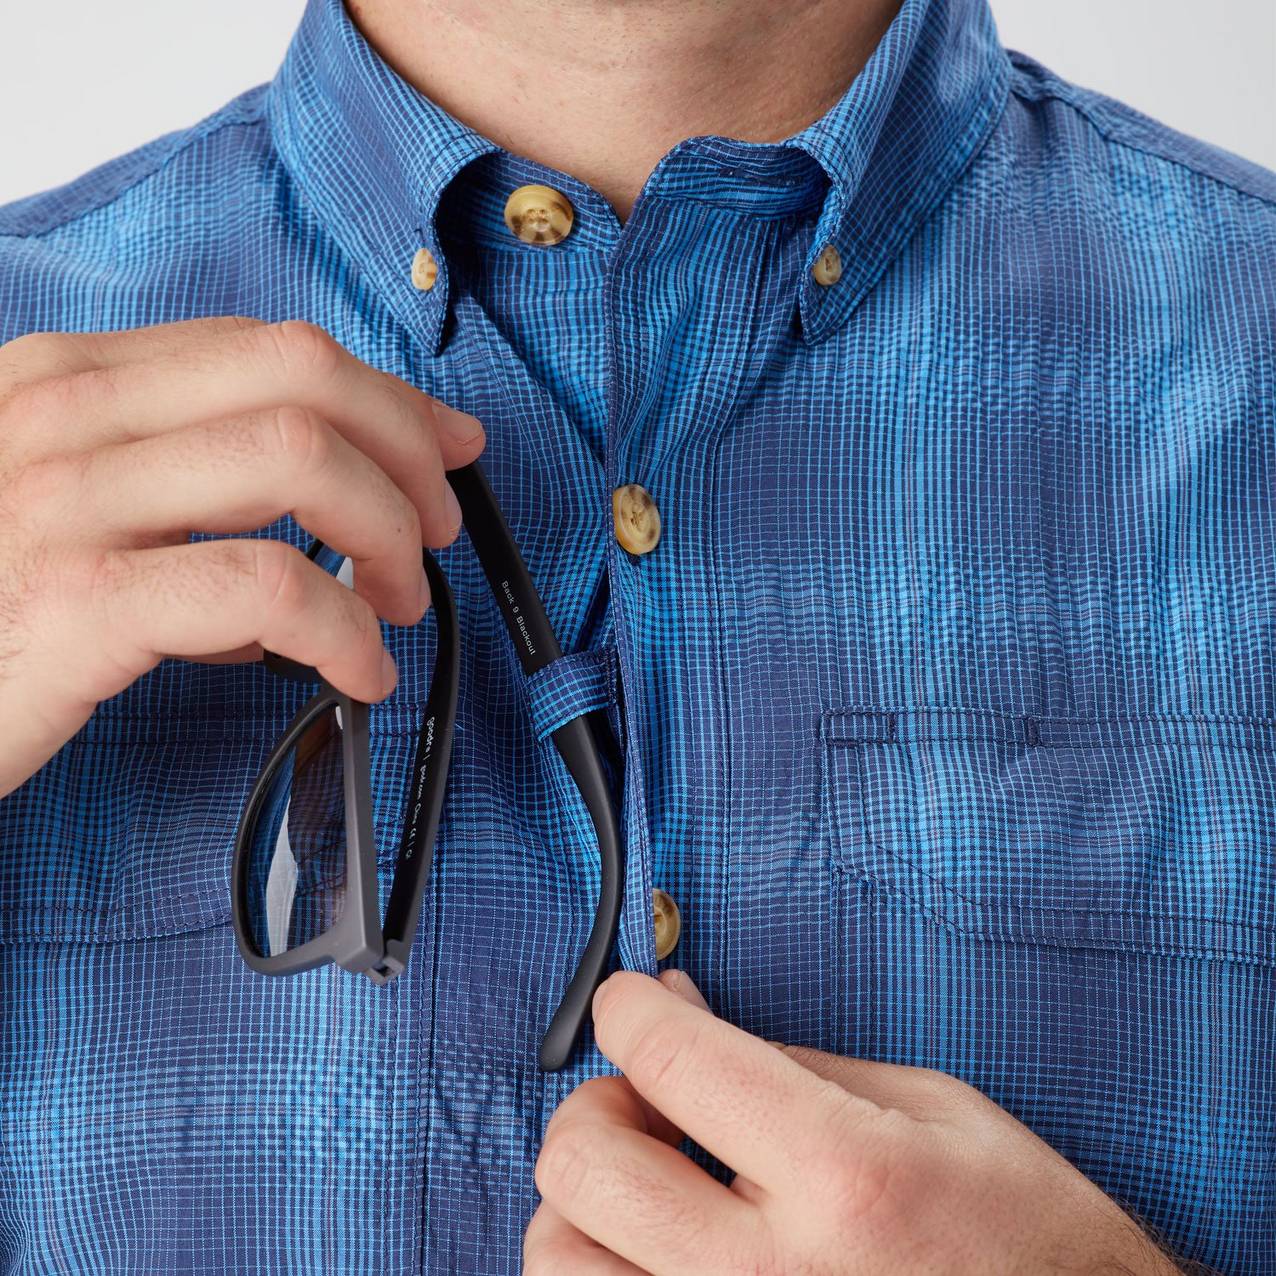 View of hands putting arm of sunglasses through loop on shirt